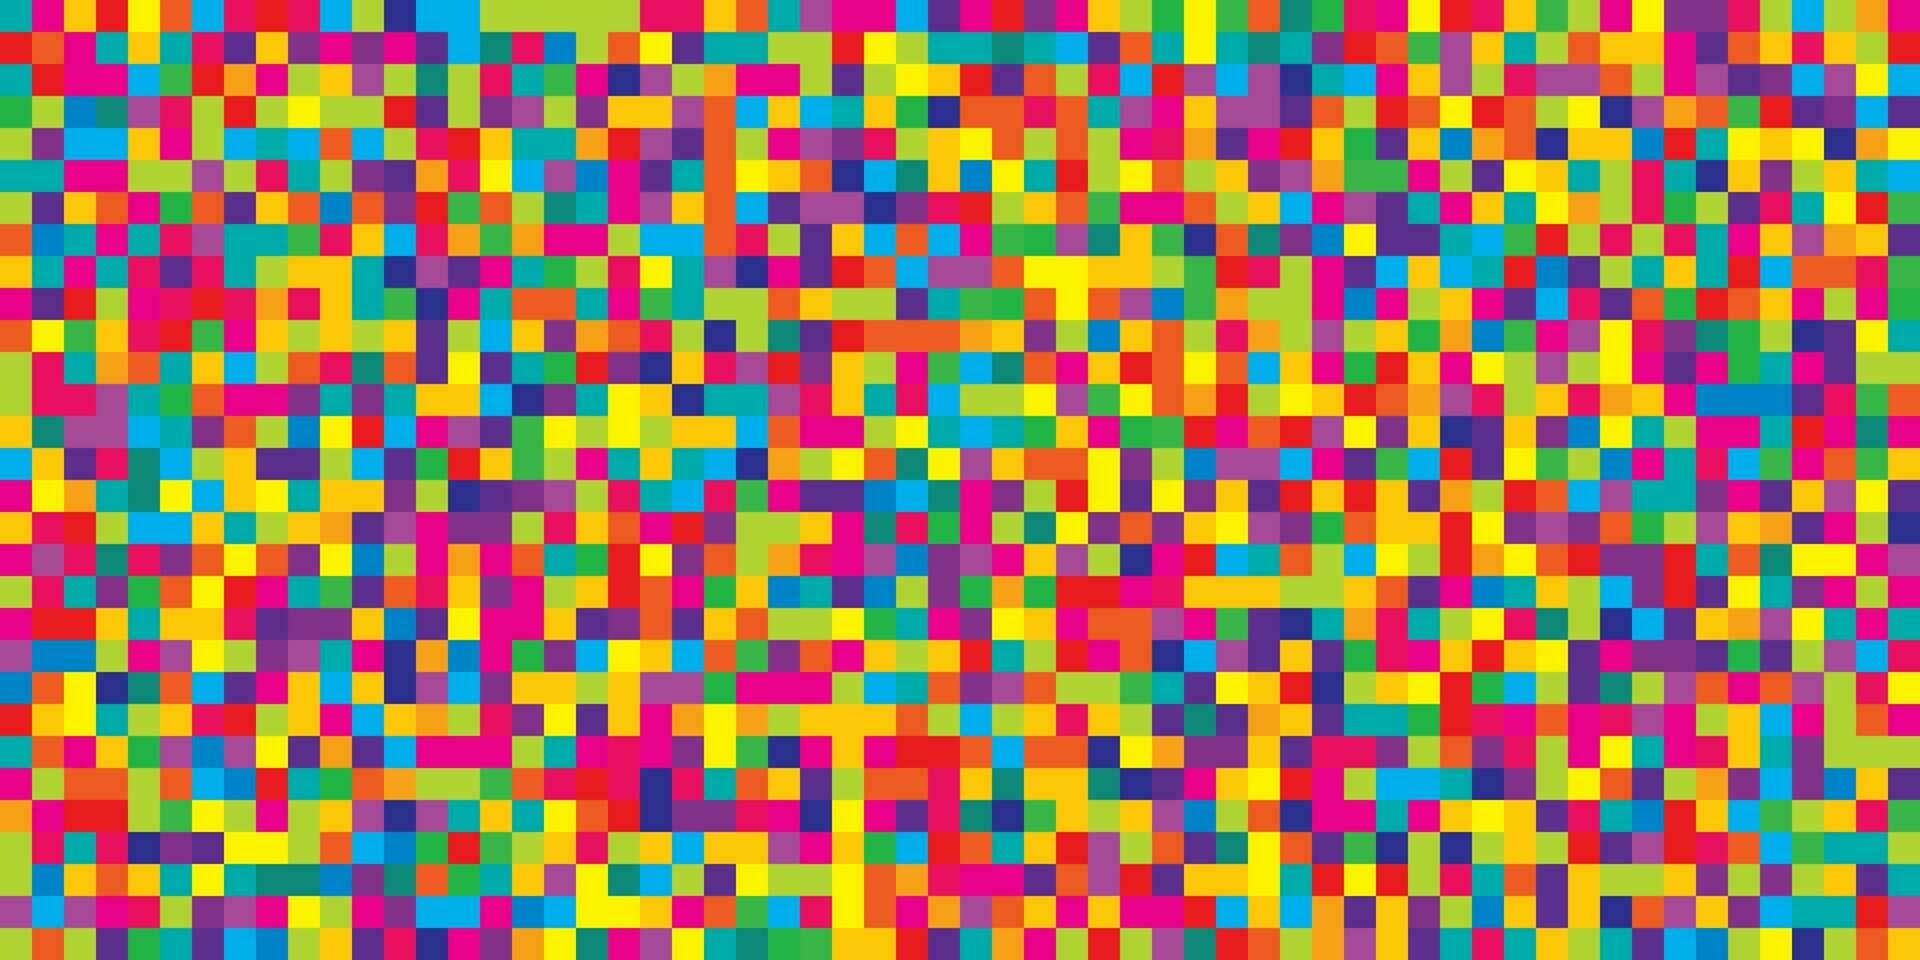 Abstract colorful seamless geometric grid background with colored shapes vector